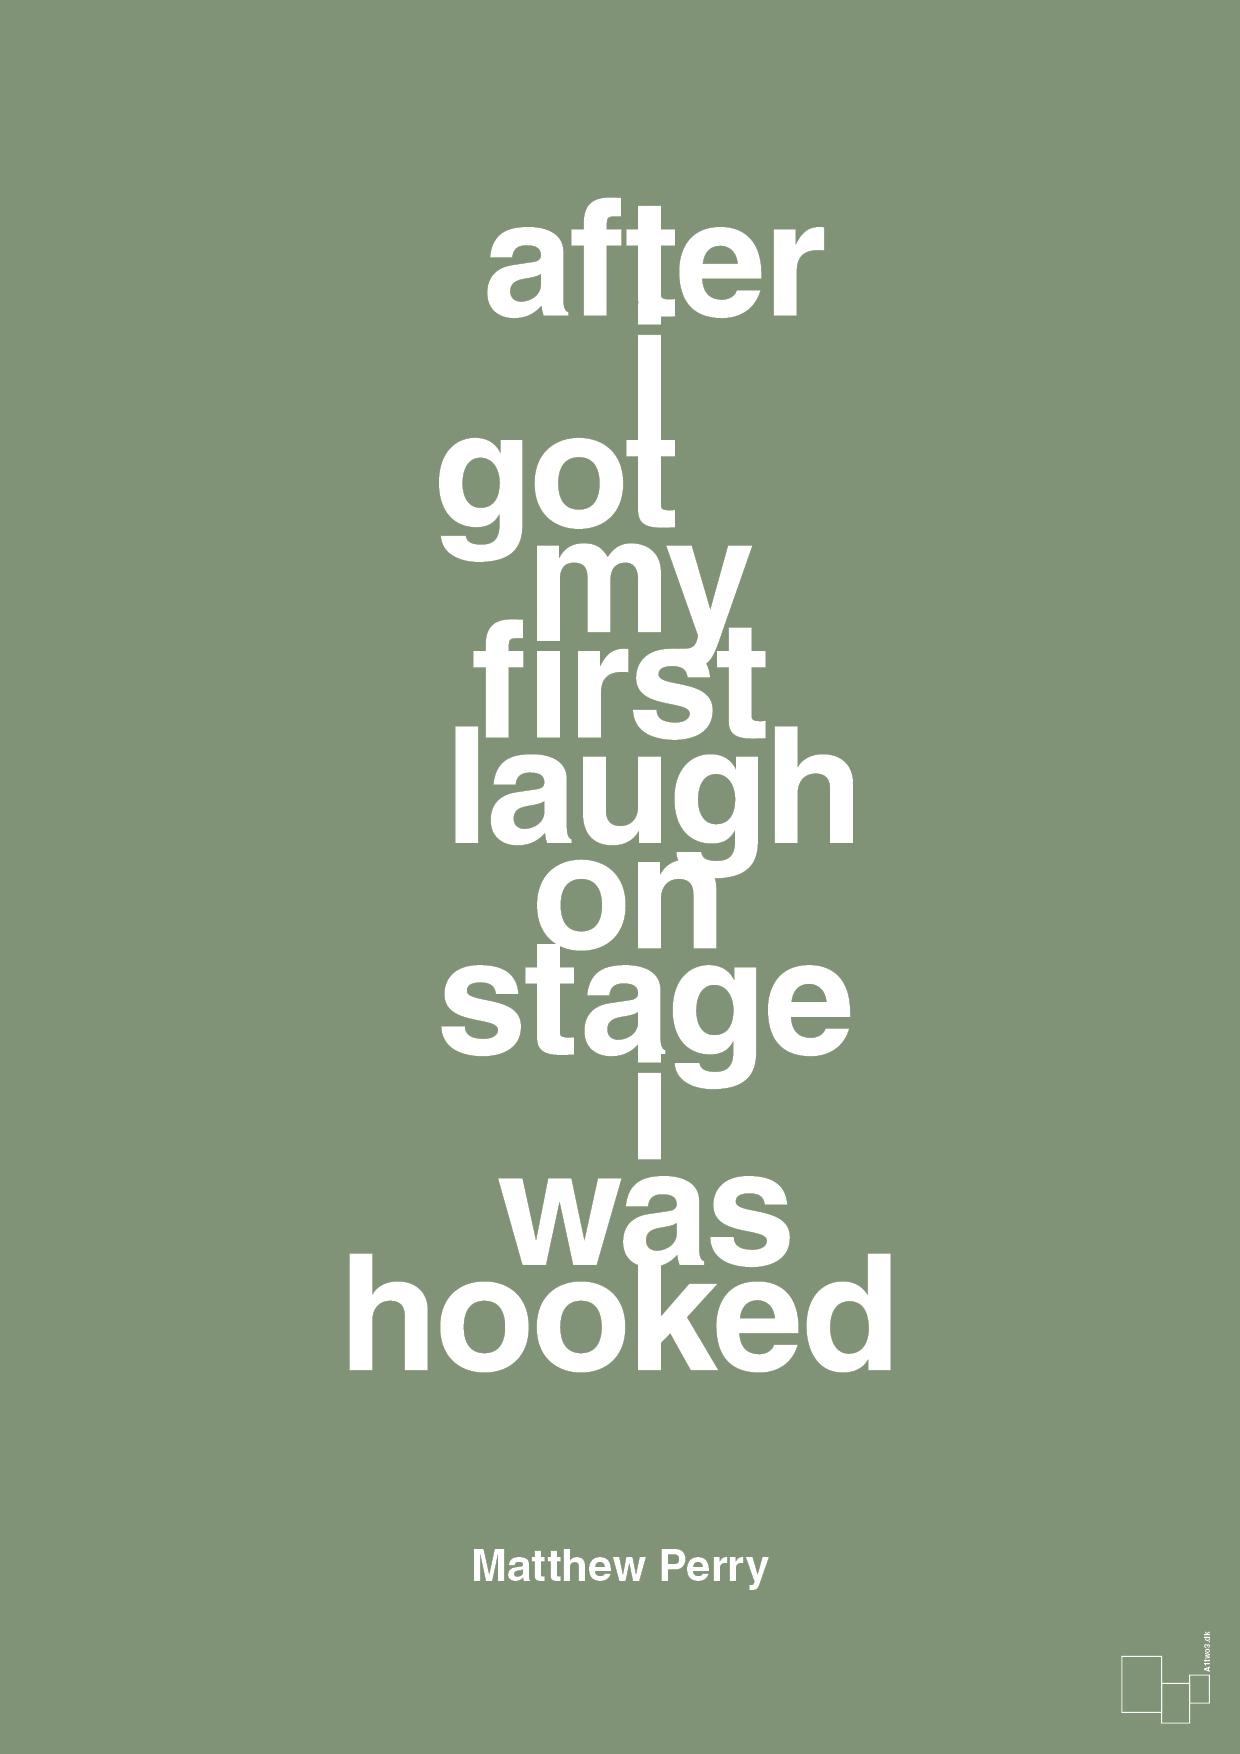 after i got my first laugh on stage i was hooked - Plakat med Citater i Jade